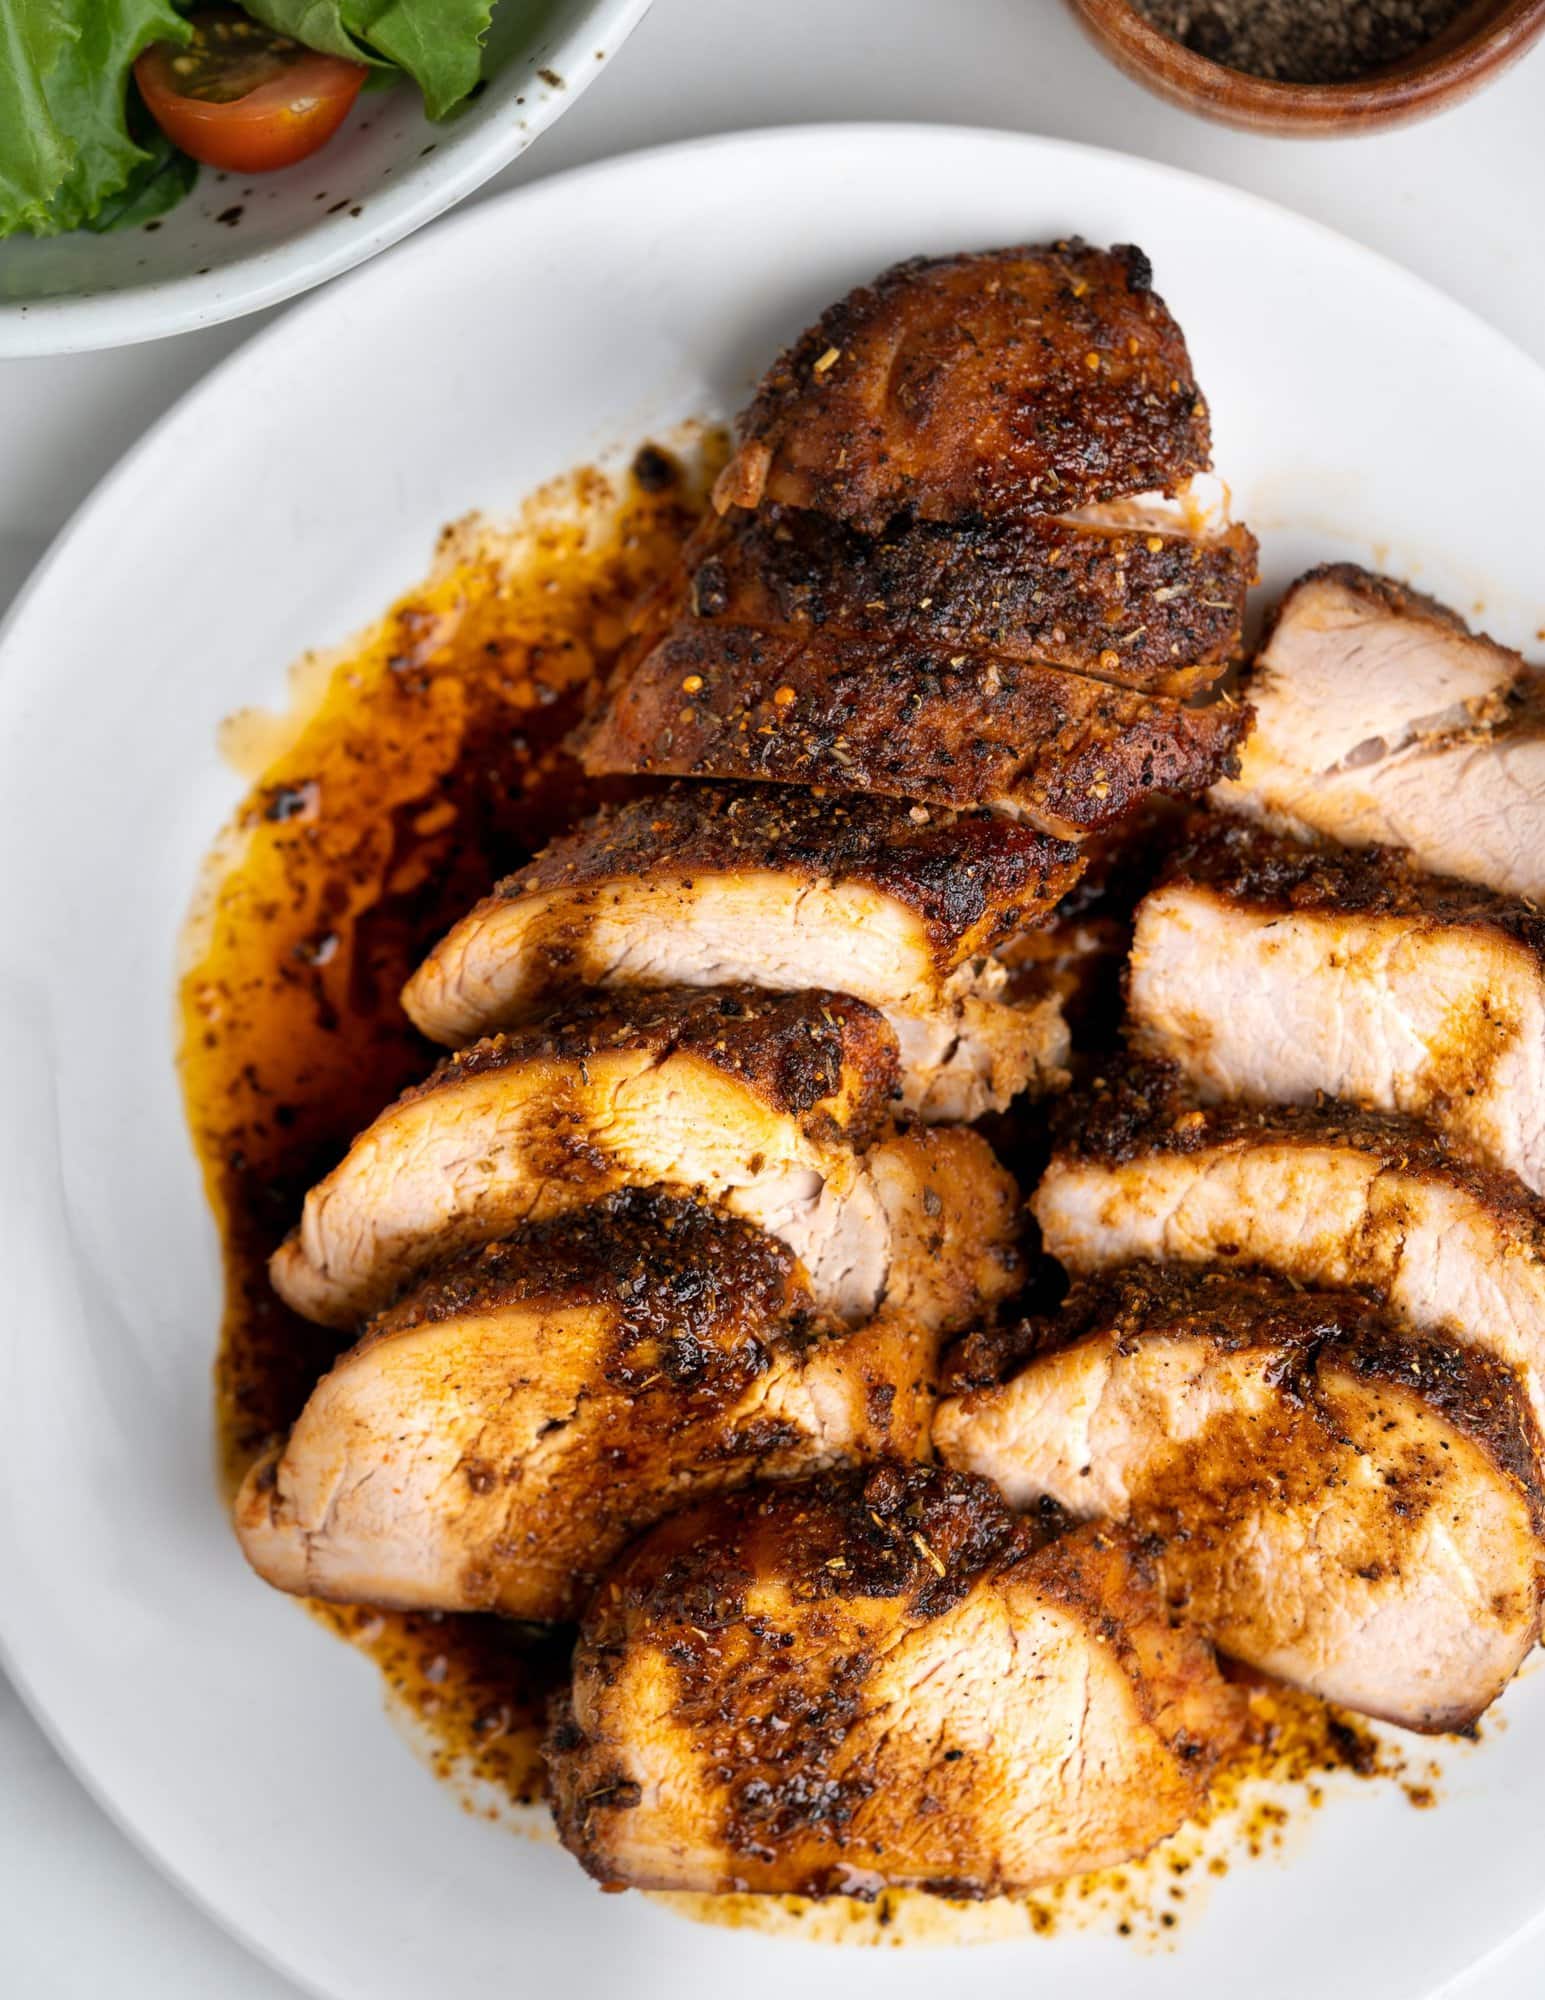 Roasted pork tenderloin in oven and slices stacked horizontally in a white plate shows a great crust and flavorful saucy drippings.